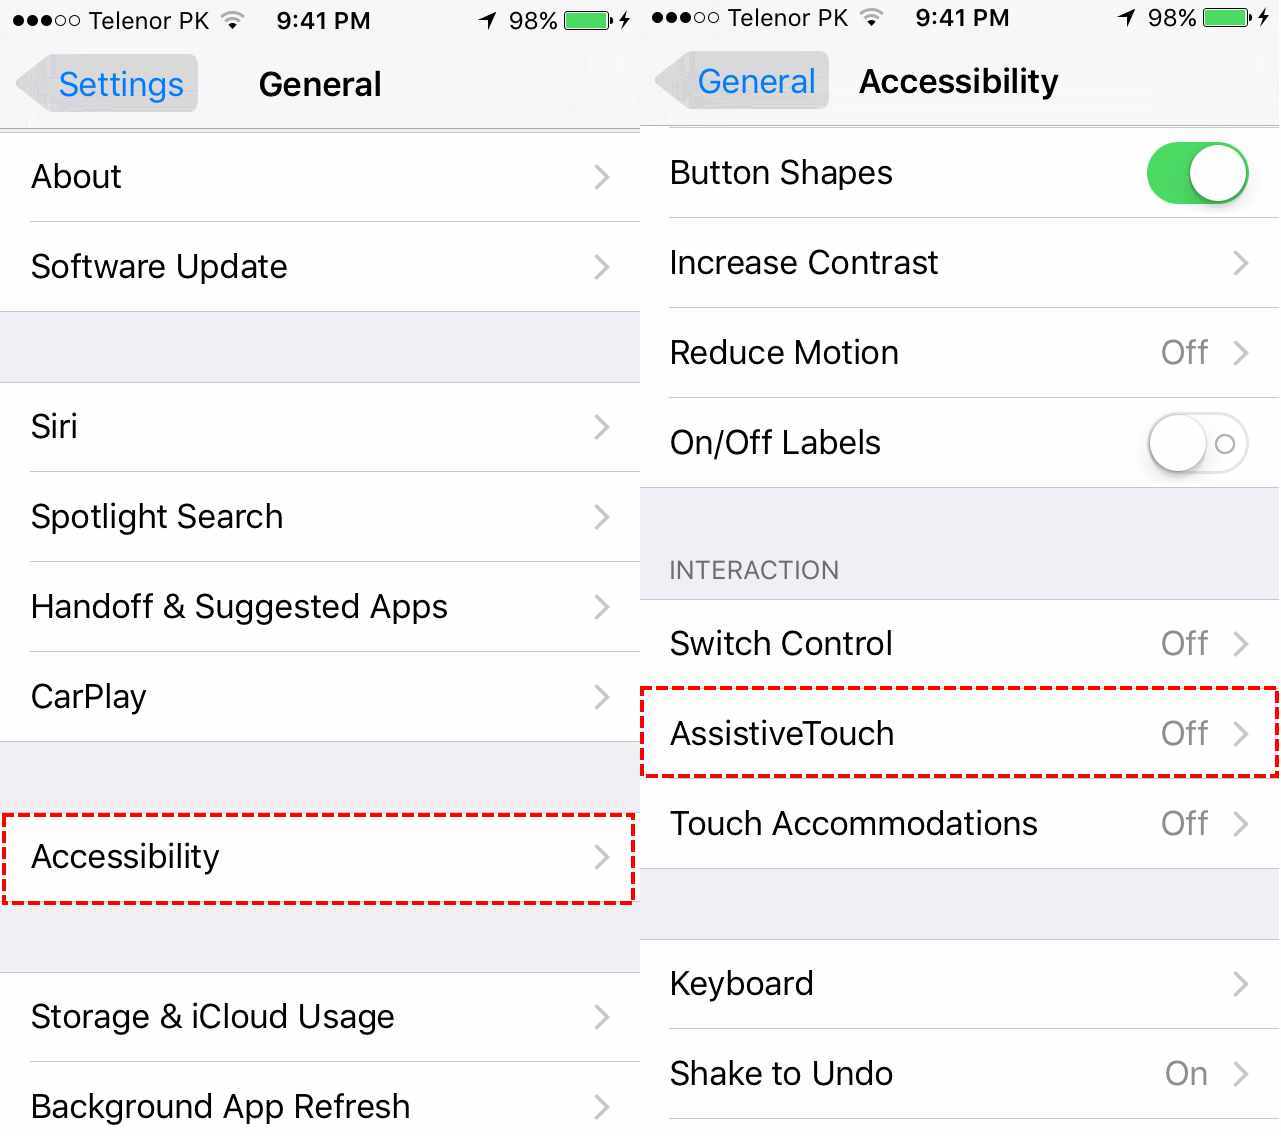 Go To Accessibility Then Tap On Assistivetouch